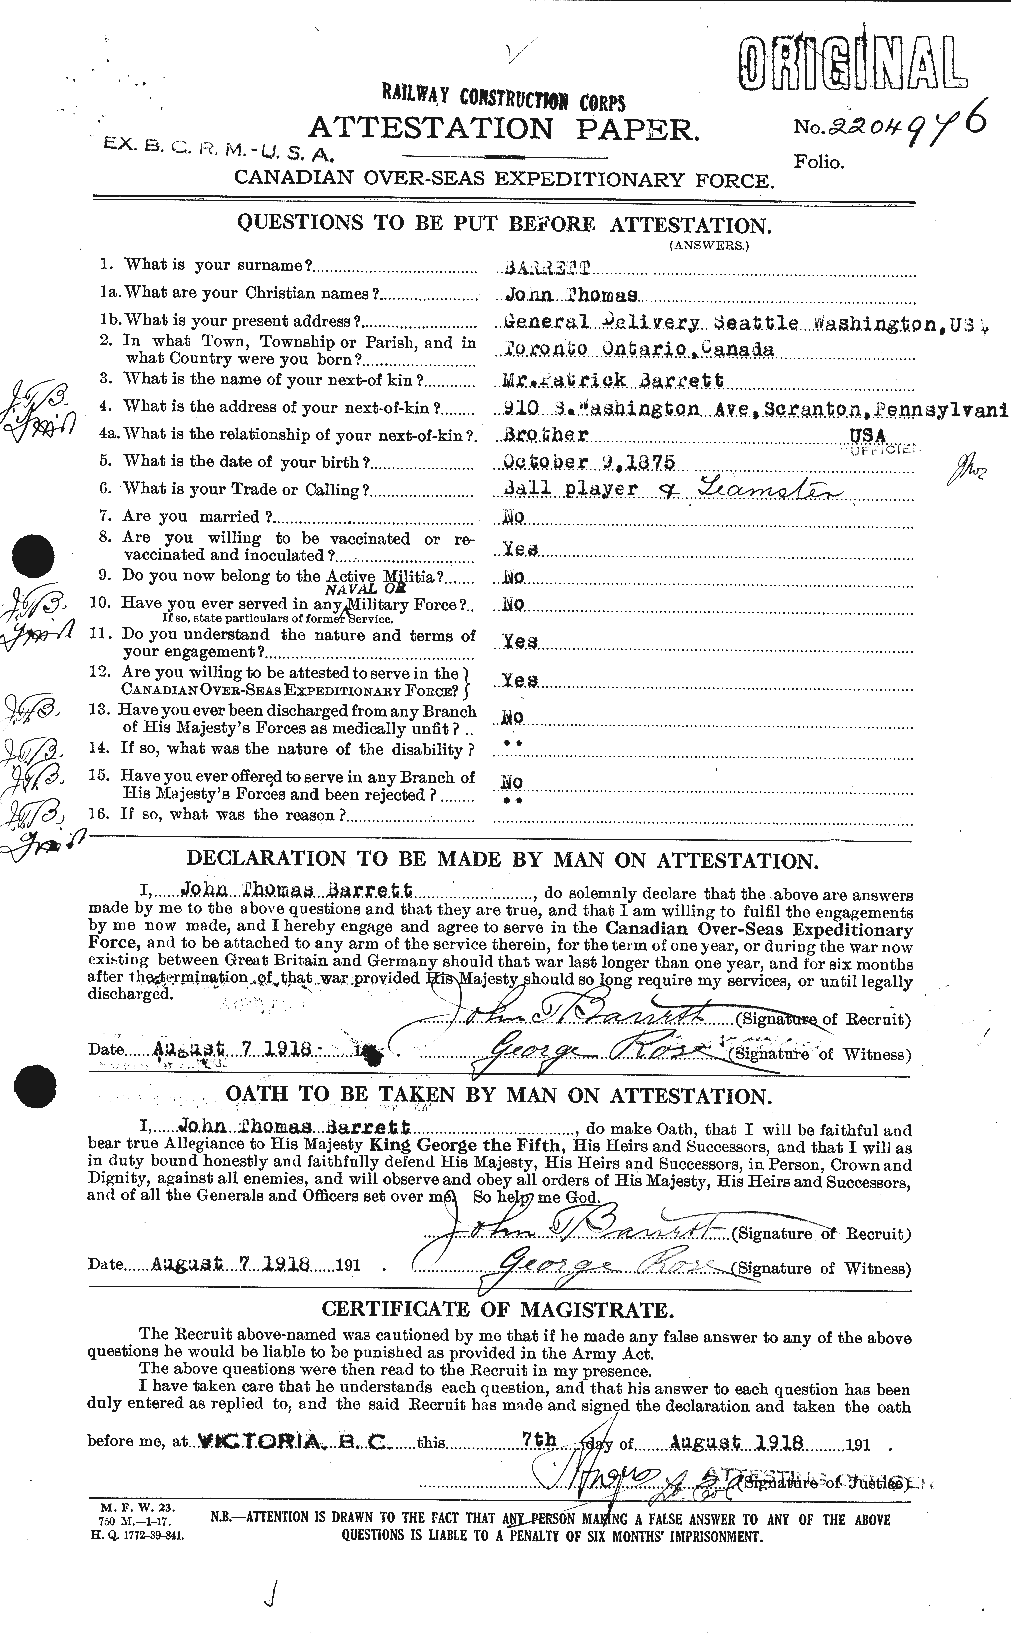 Personnel Records of the First World War - CEF 220239a